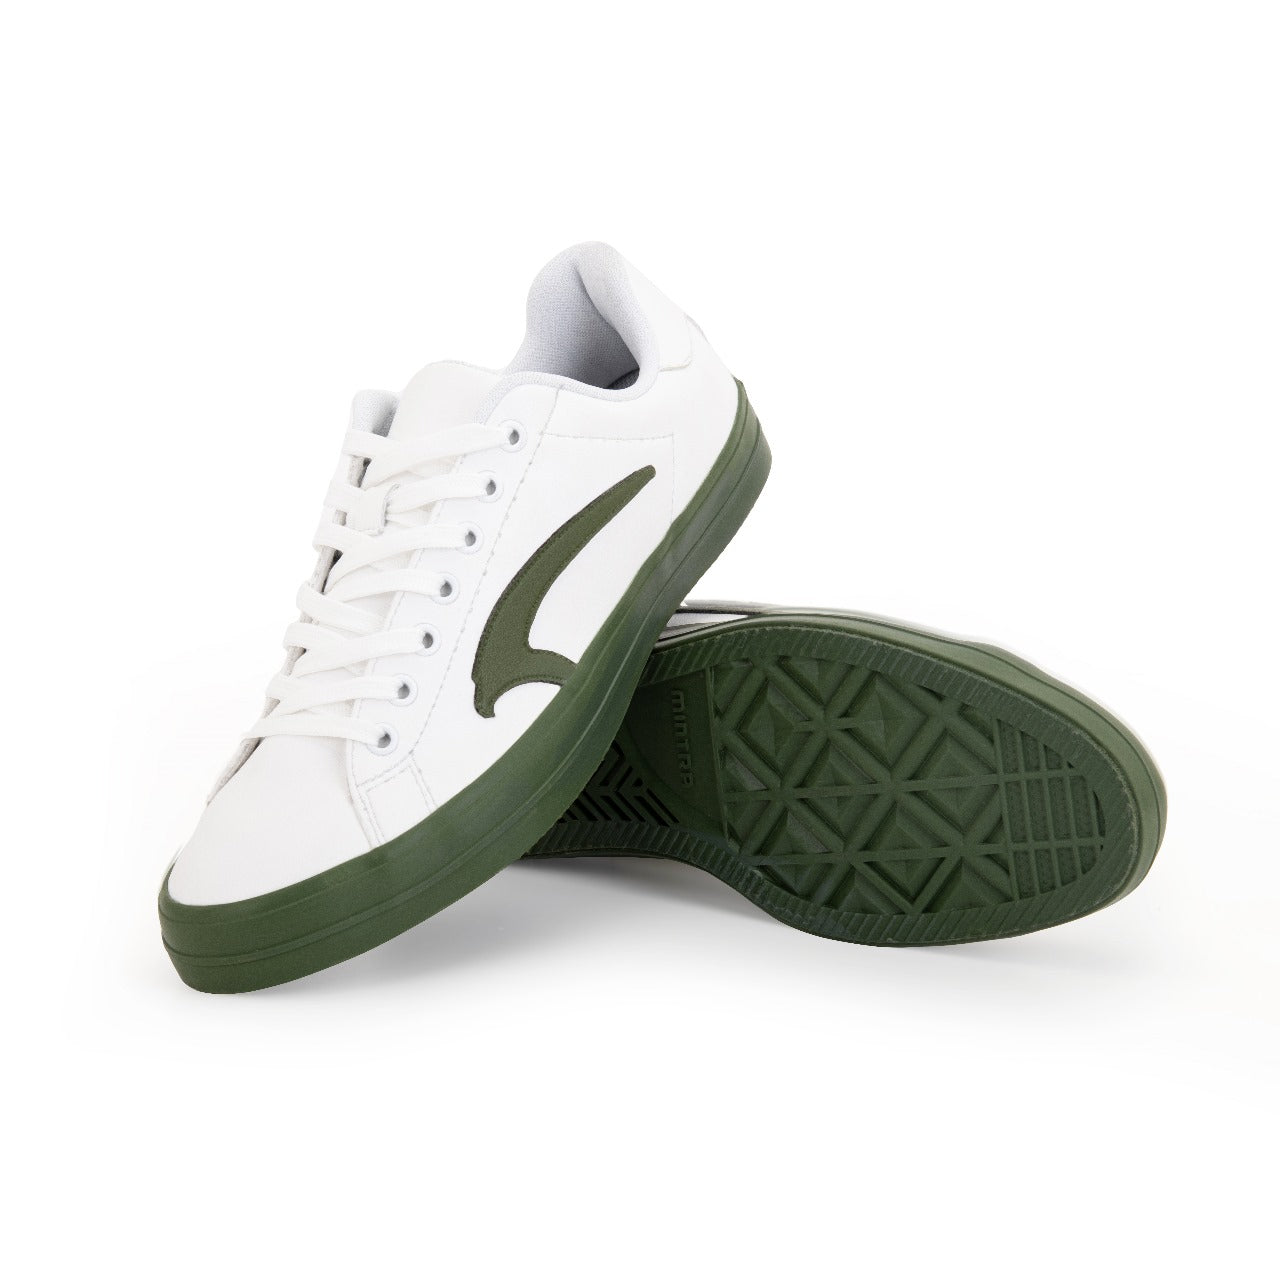 Mintra Urban Shoes For Men, White & Olive